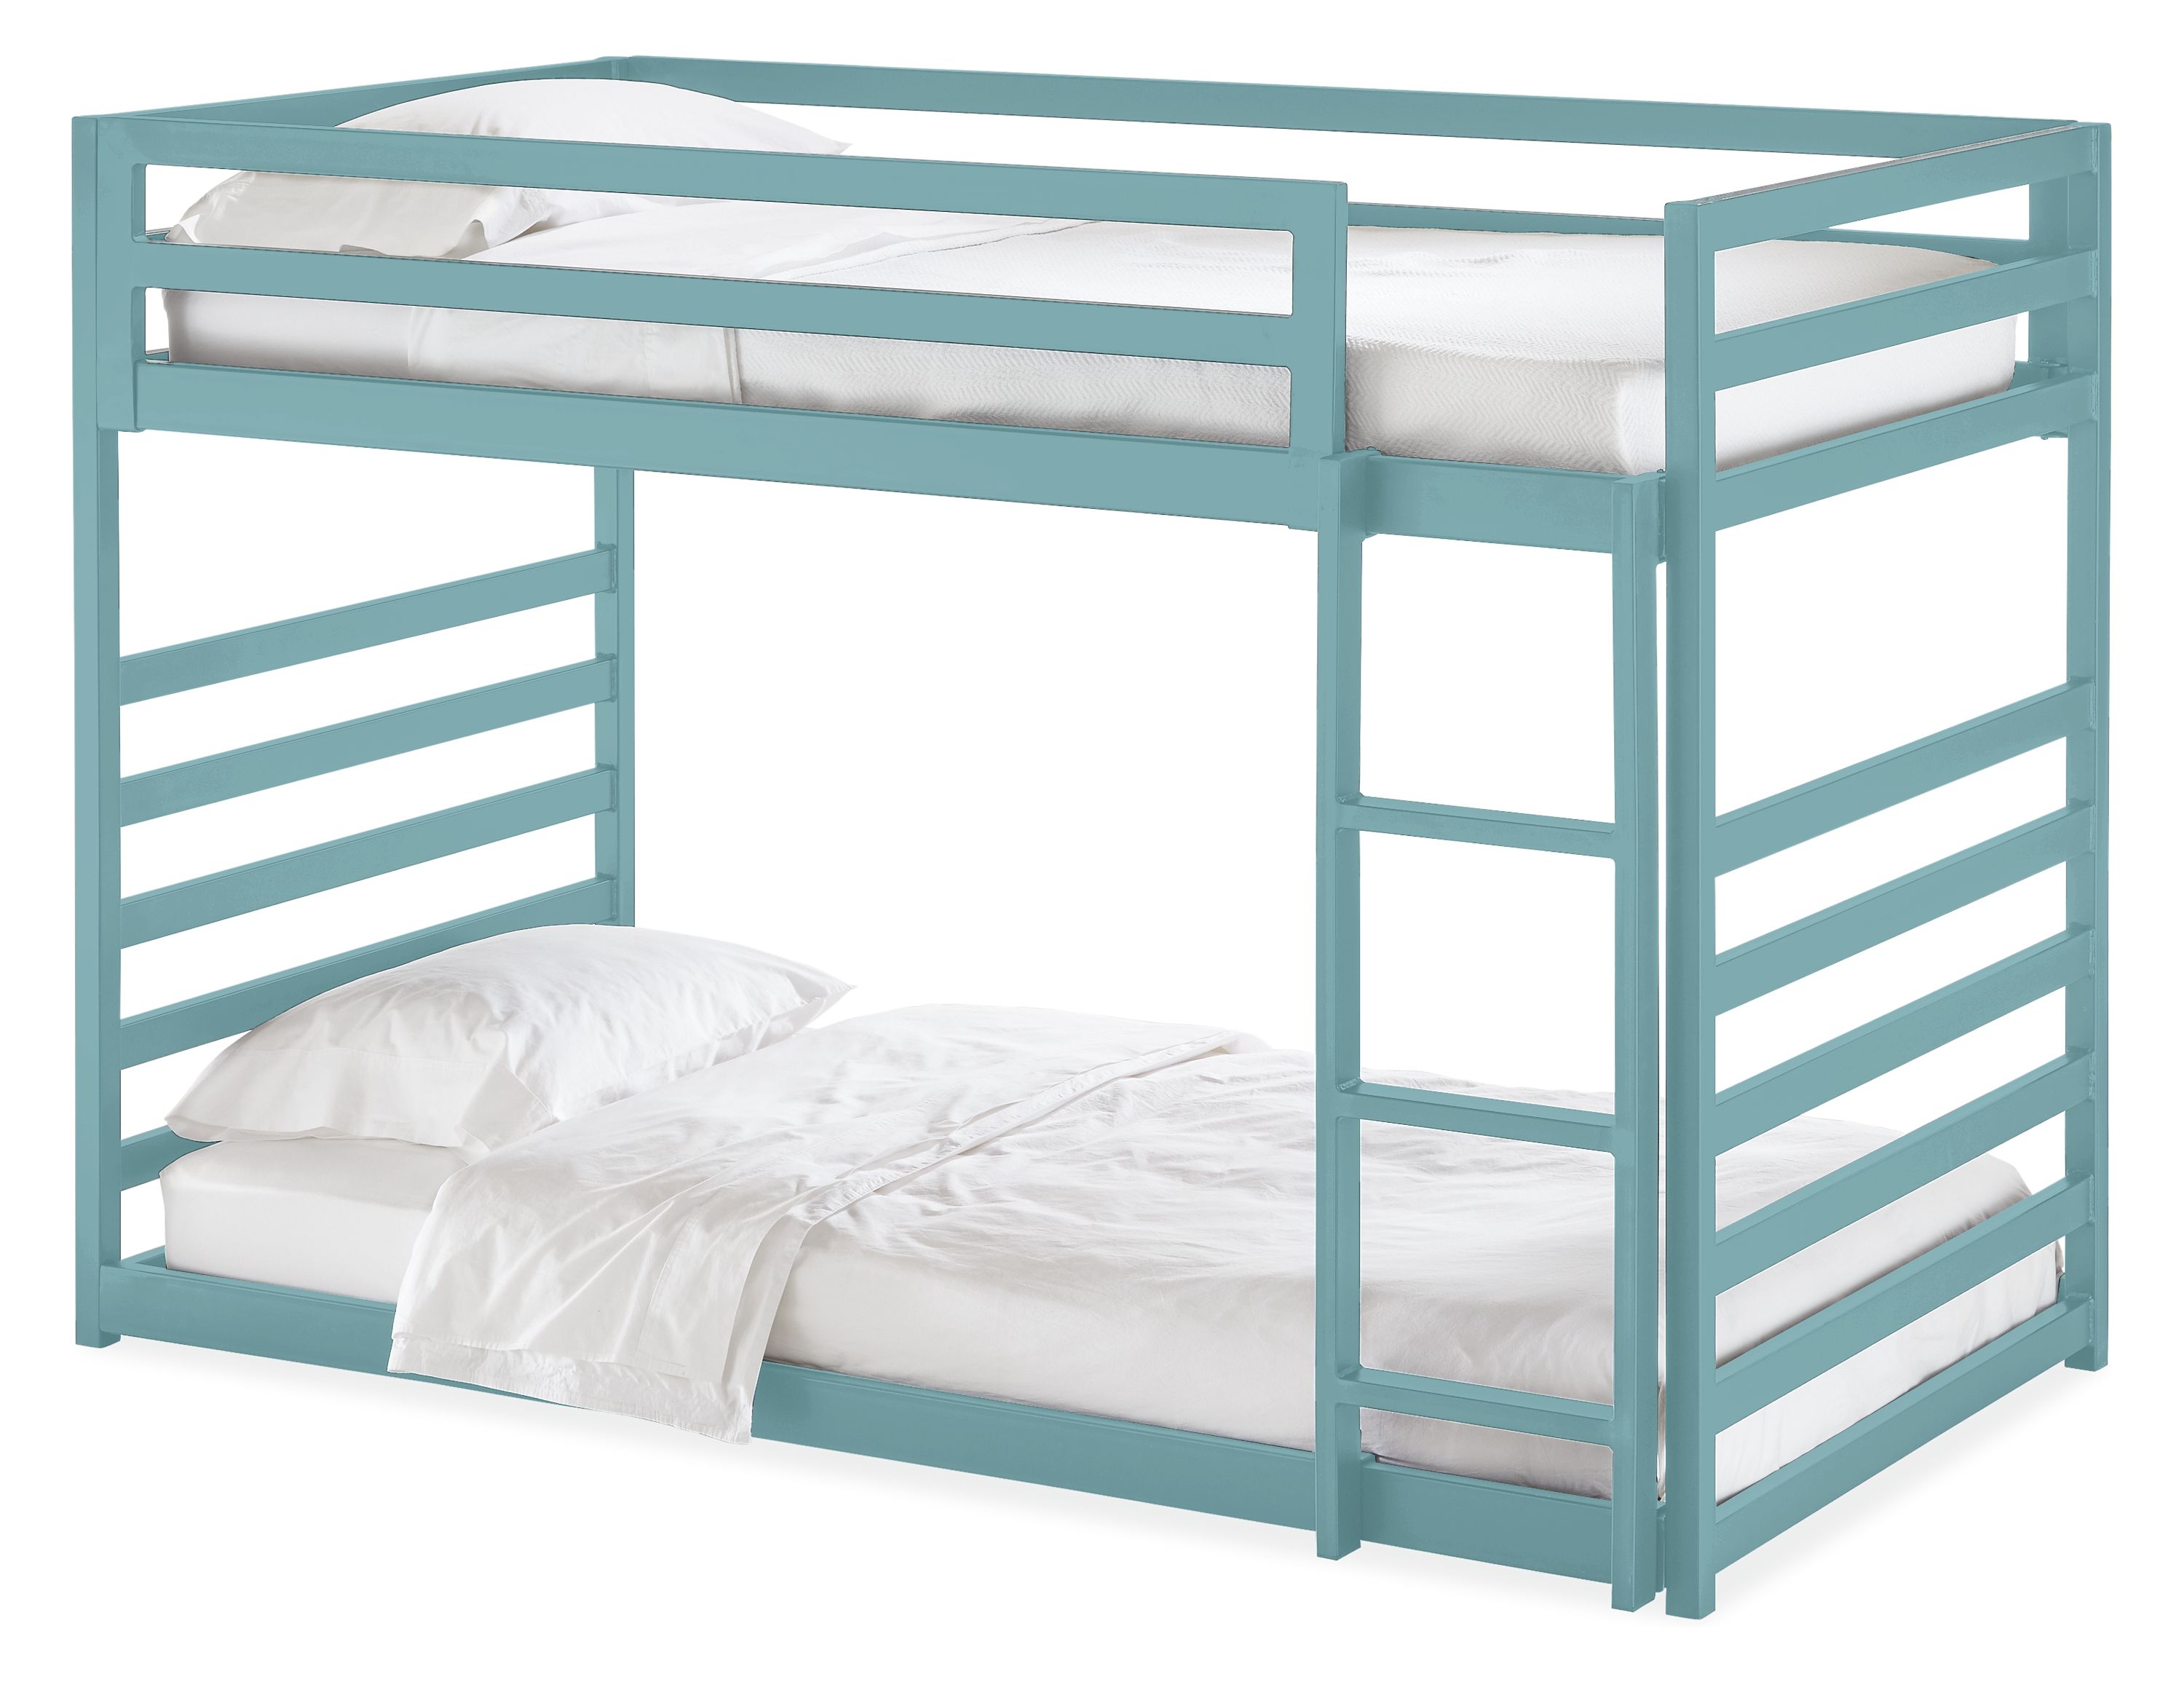 Fort Bunk Beds In Colors Twin Over, Fort Style Bunk Beds